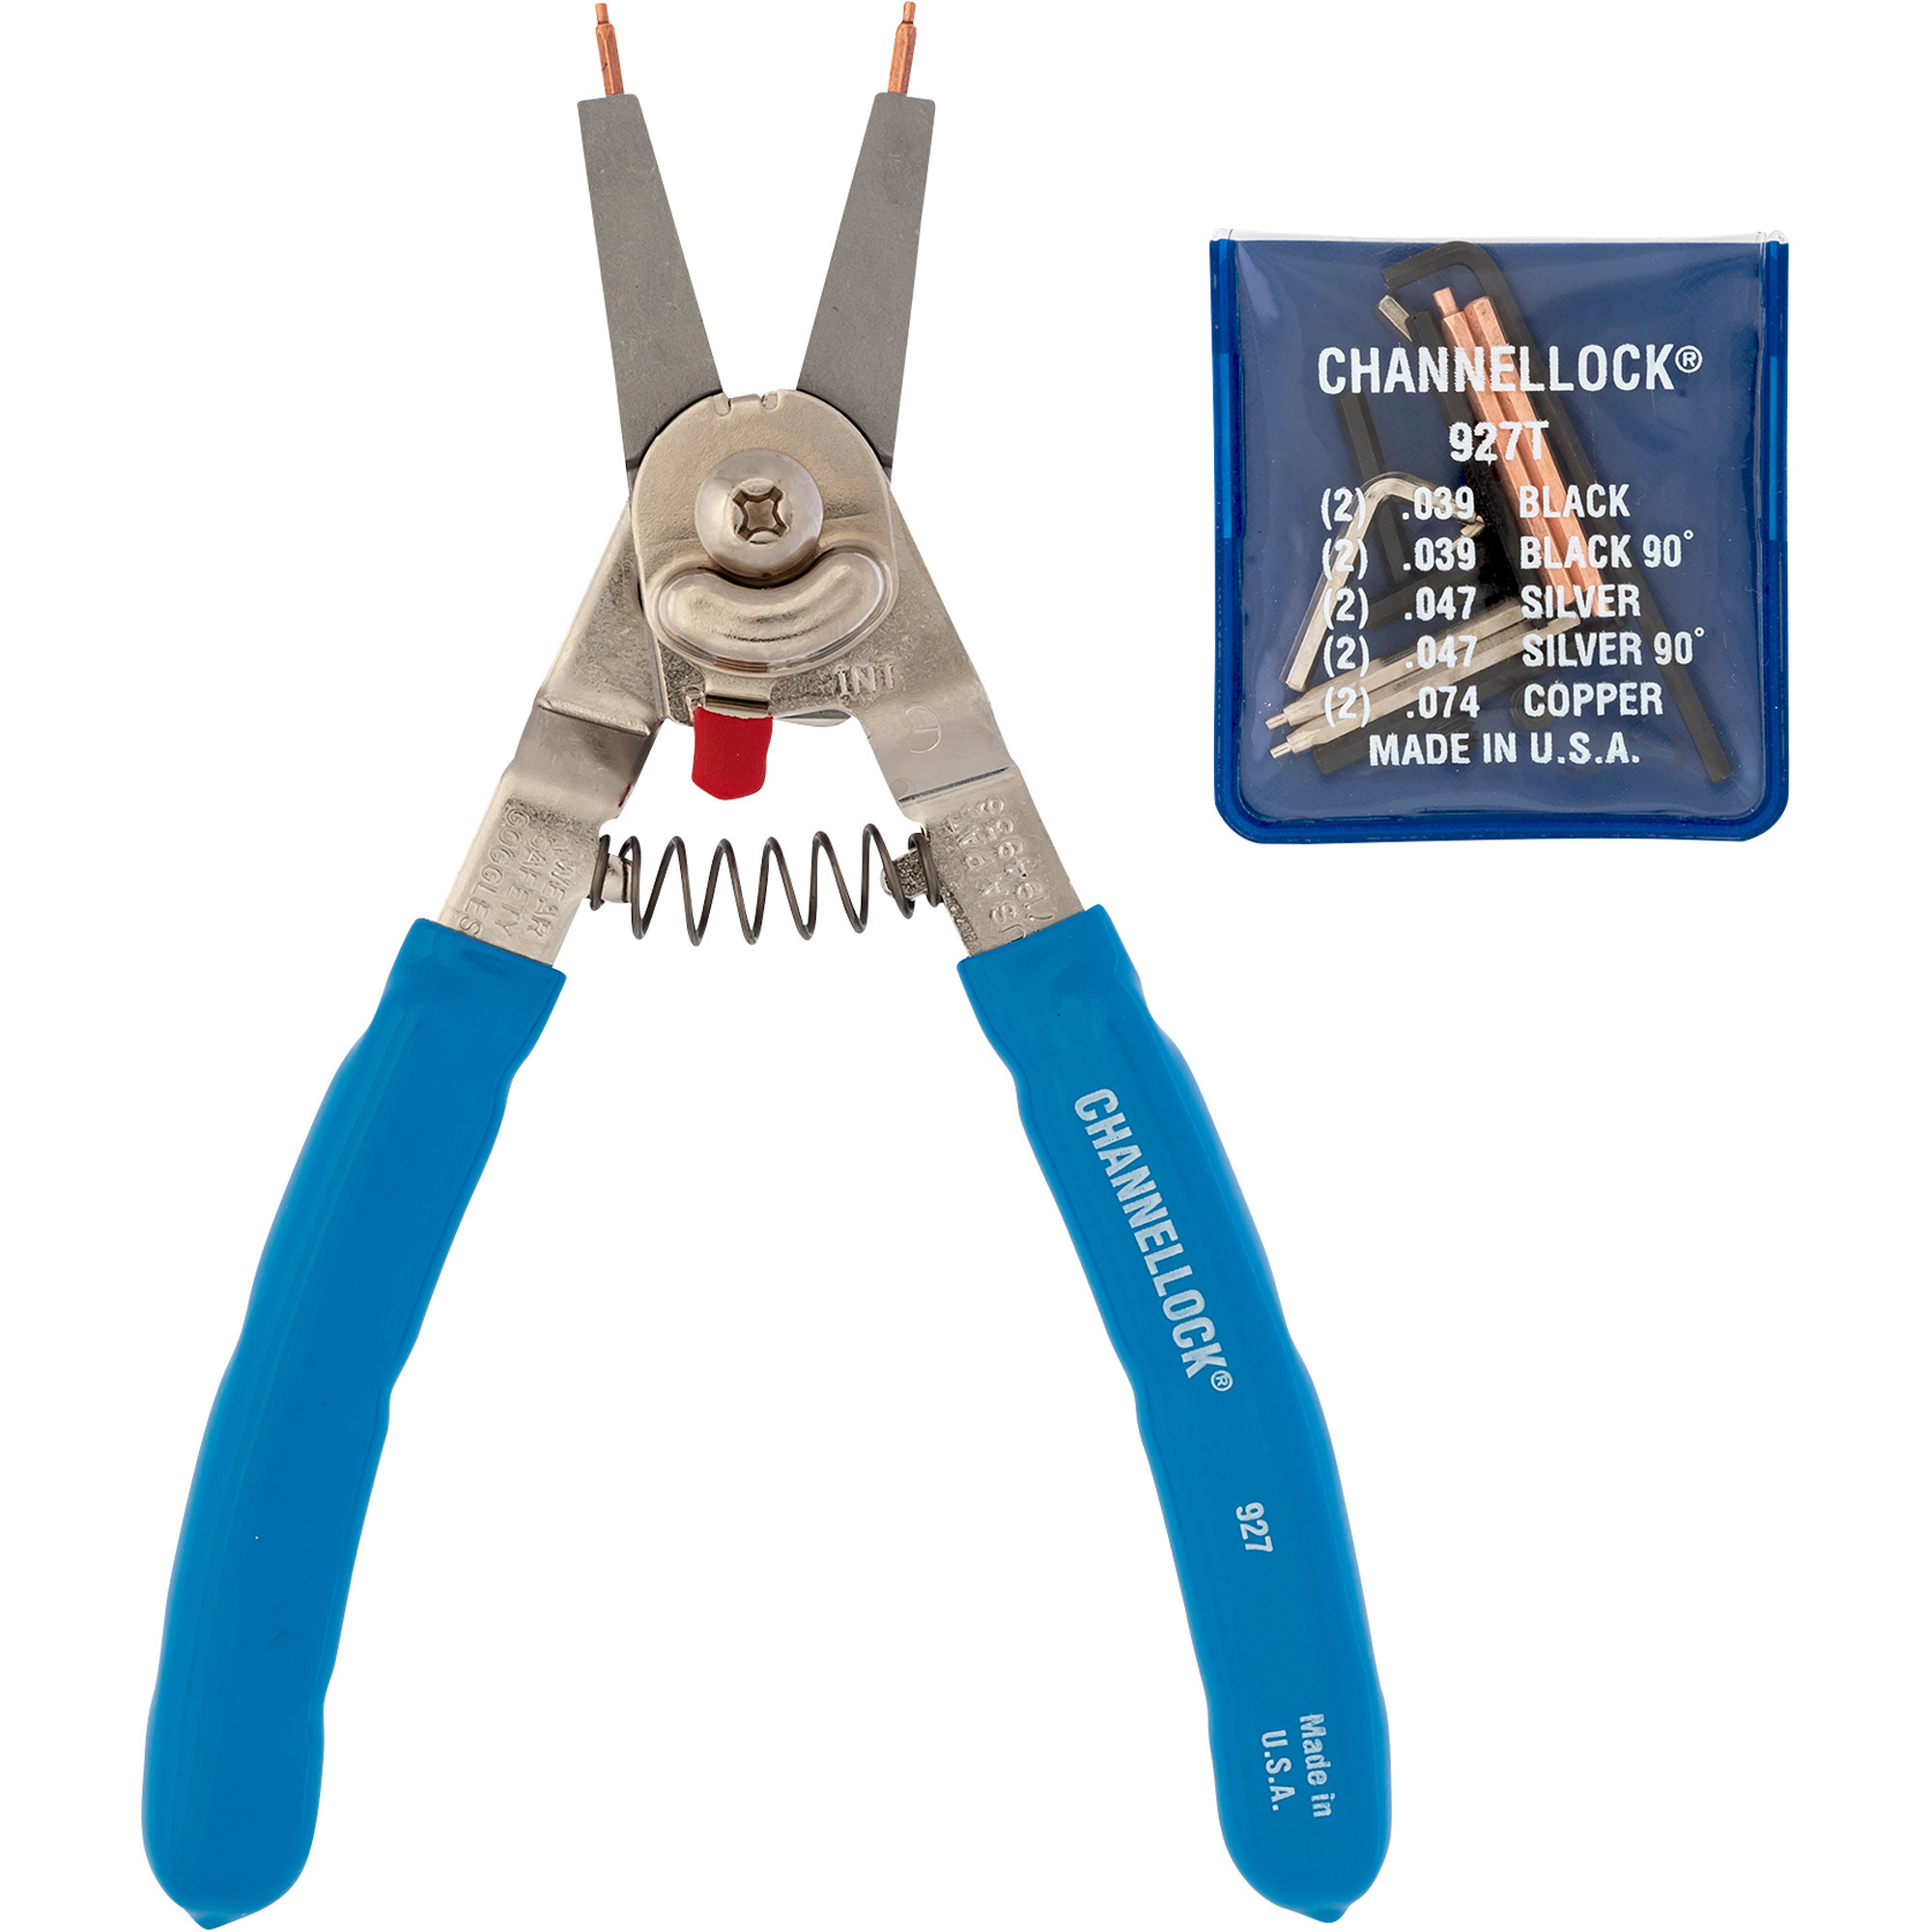 Channellock Snap Ring Pliers, Model 927